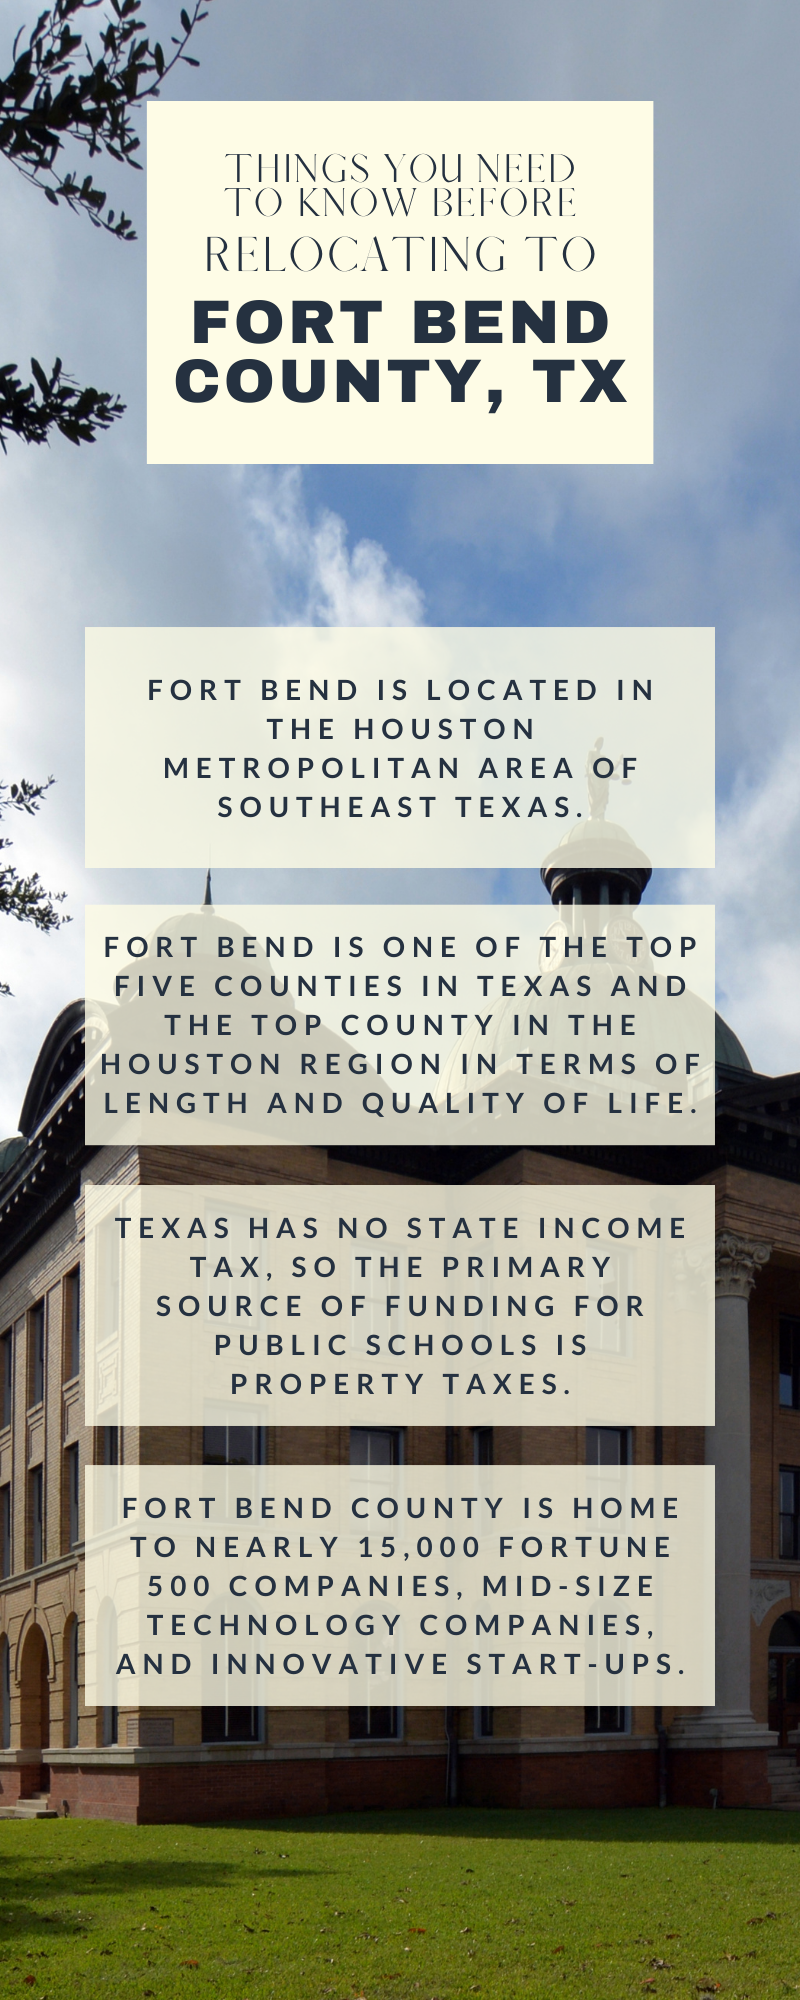 Infographic Showing Facts About Fort Bend County TX